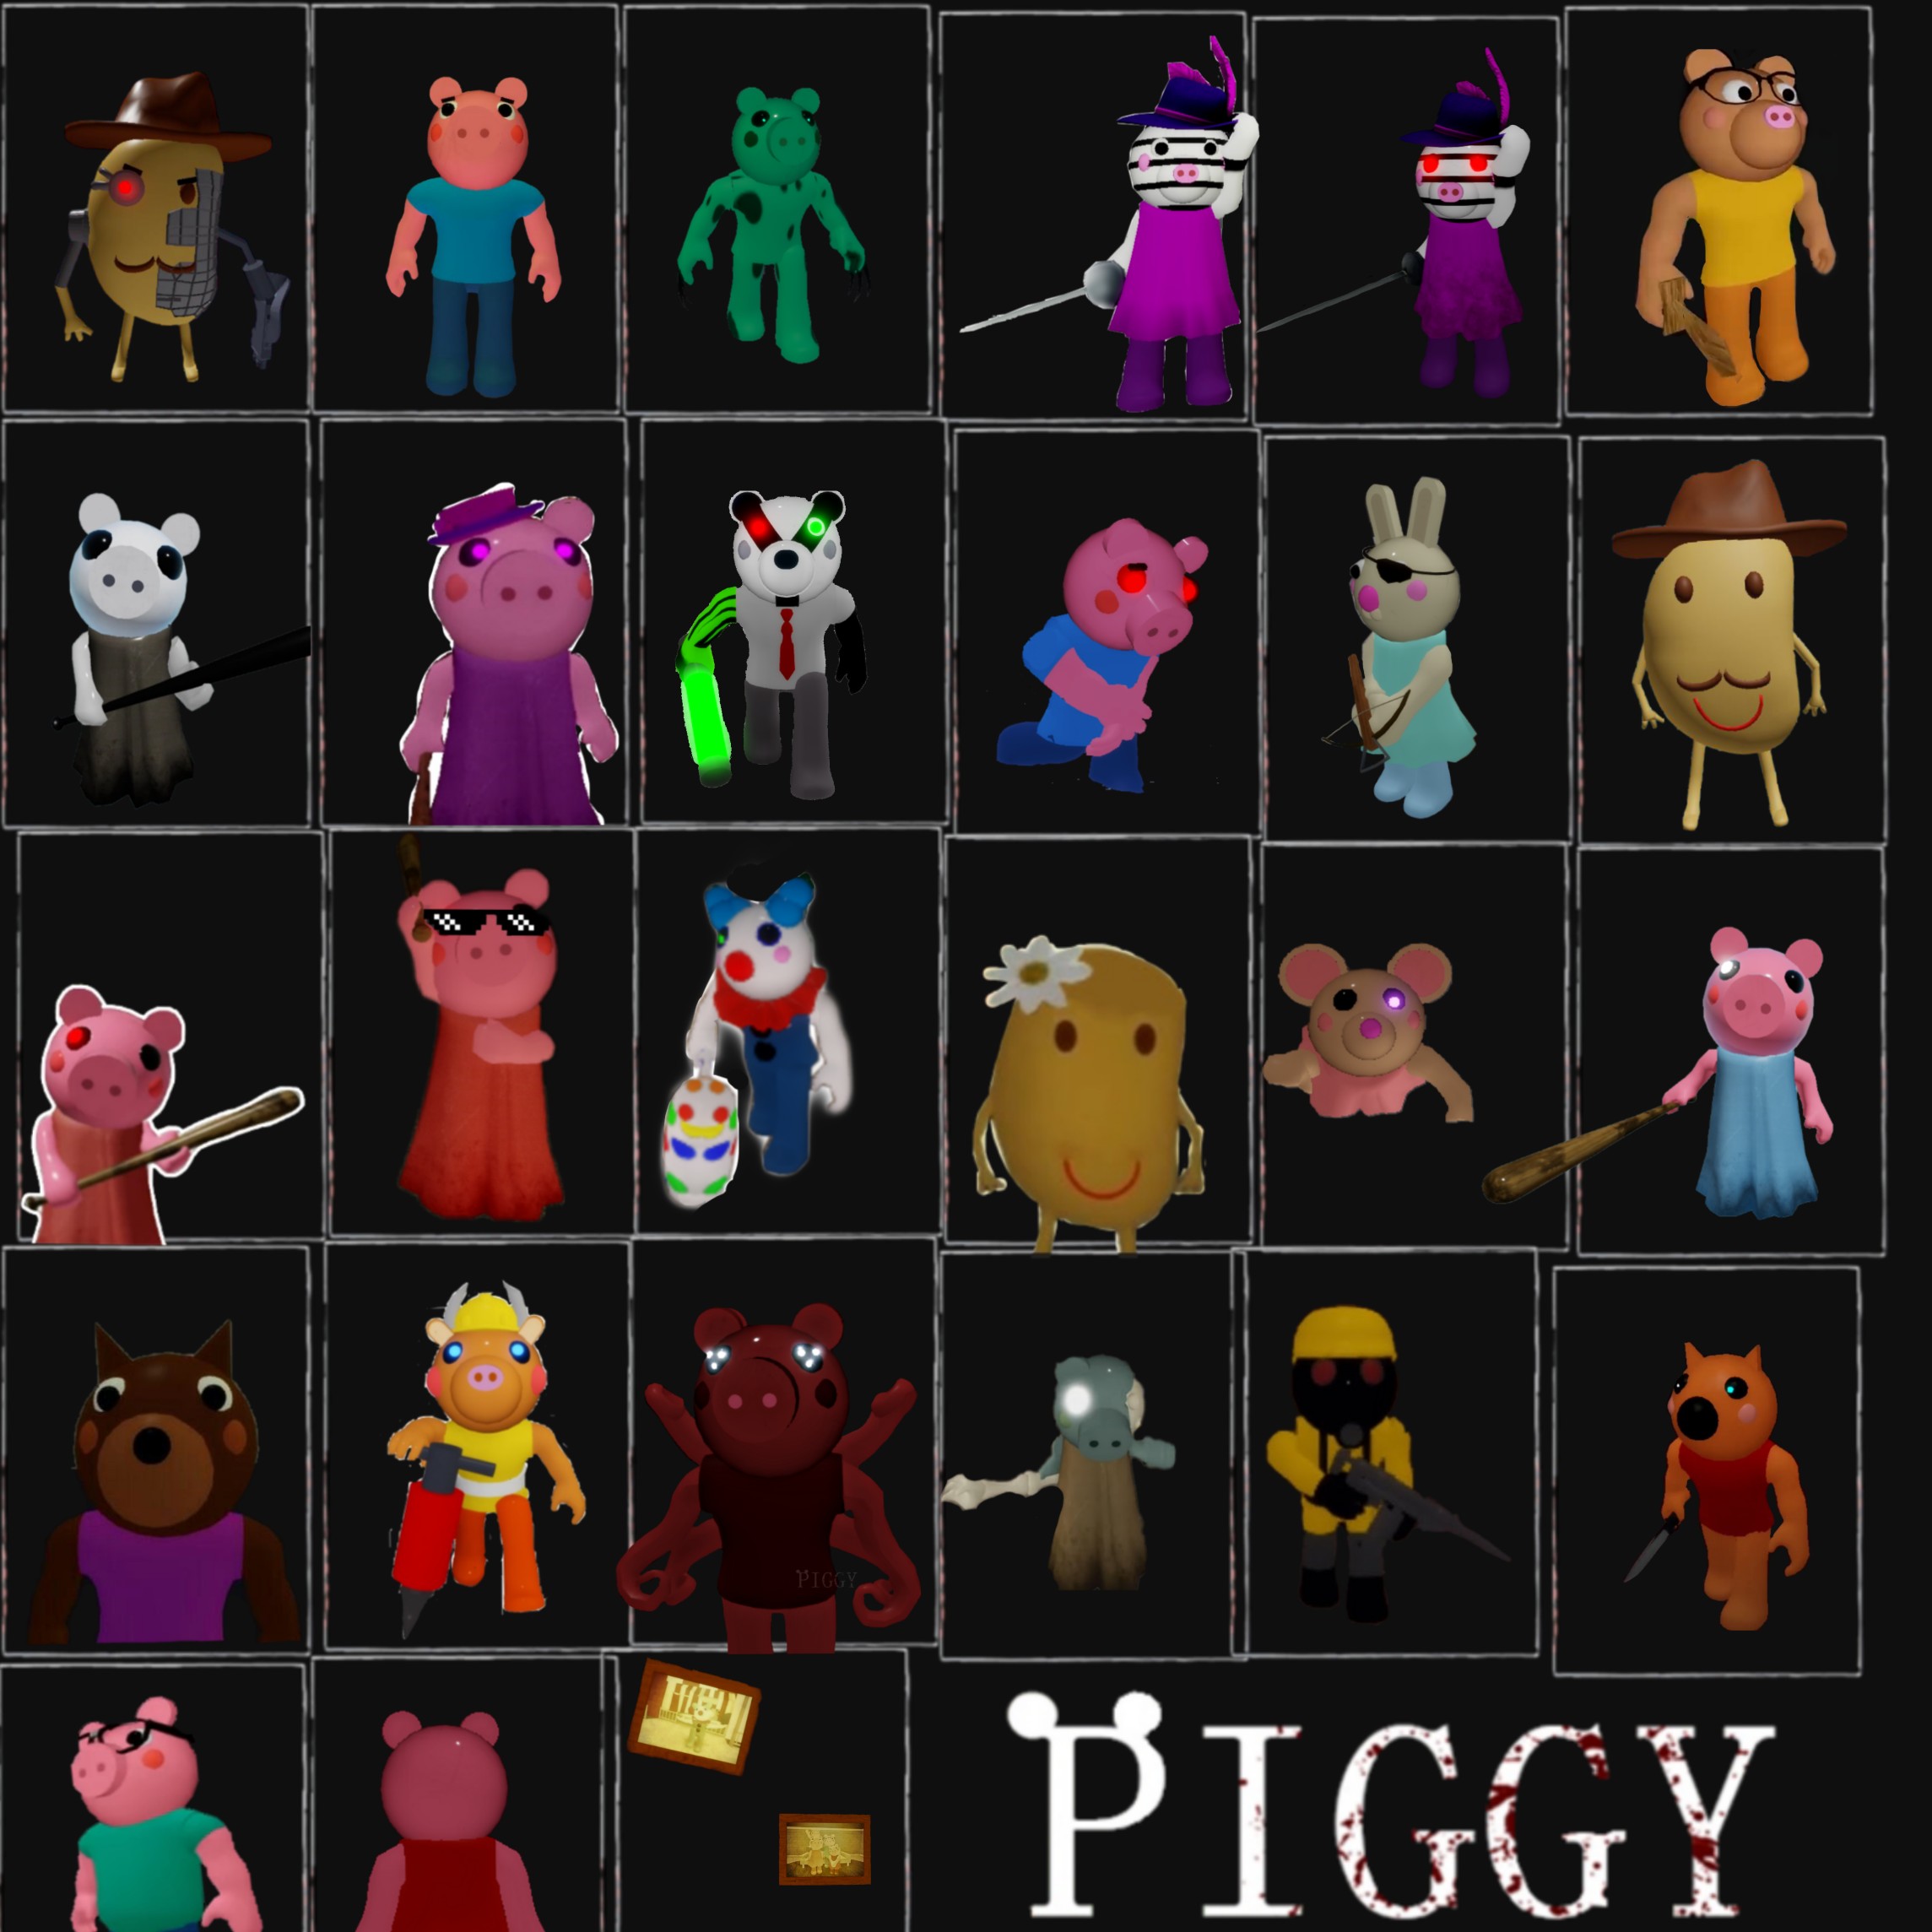 Ucn Piggy Roblox Image By Fredy - ucn roblox